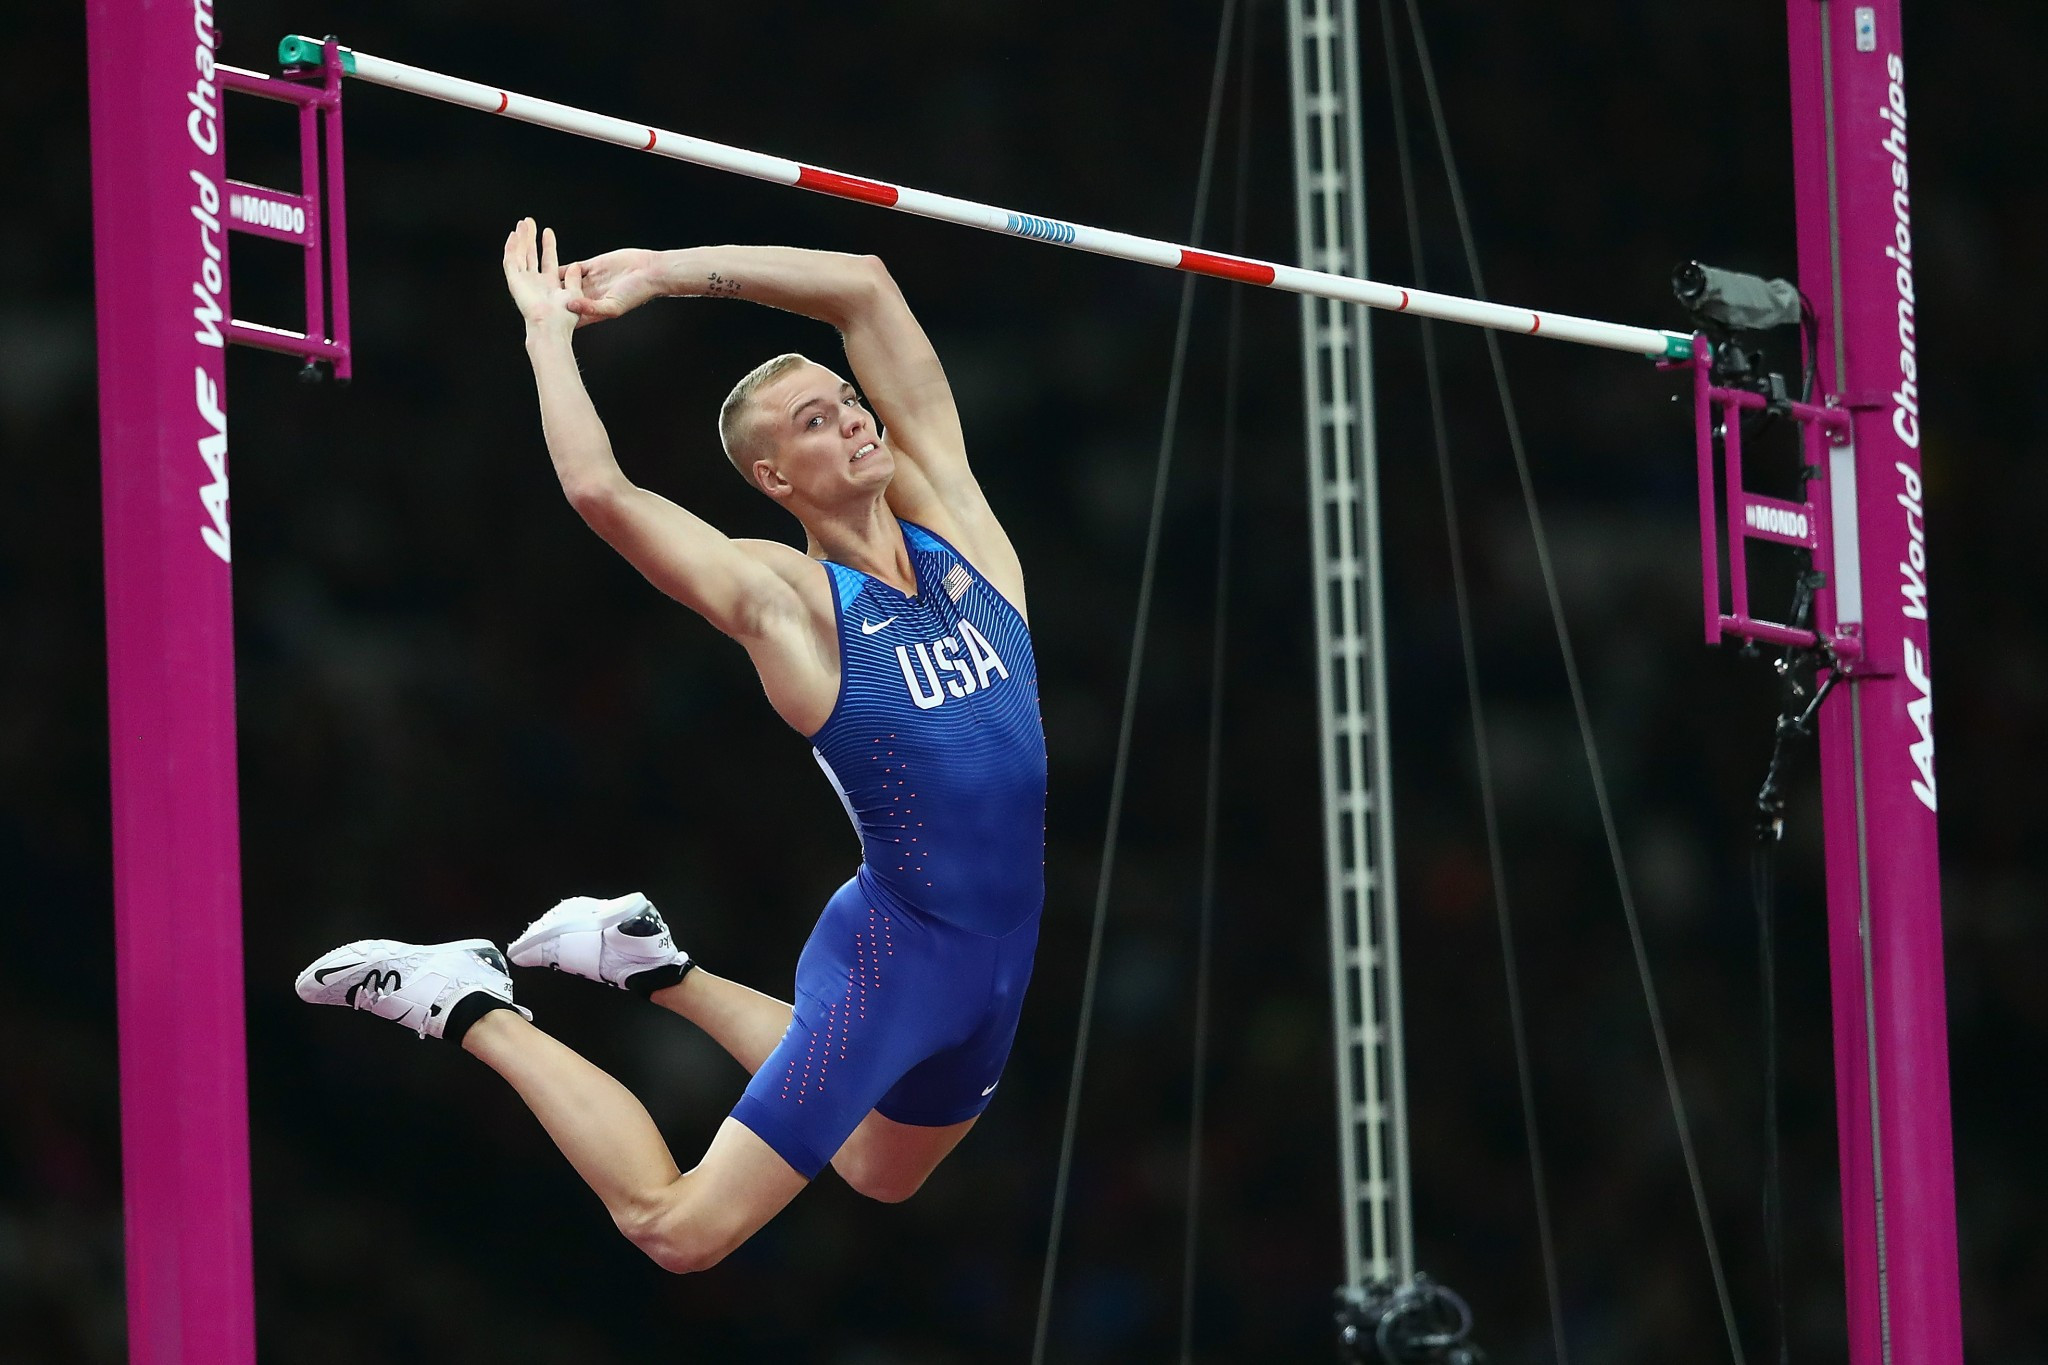 Sam Kendricks of the United States won the men's pole vault final ©Getty Images